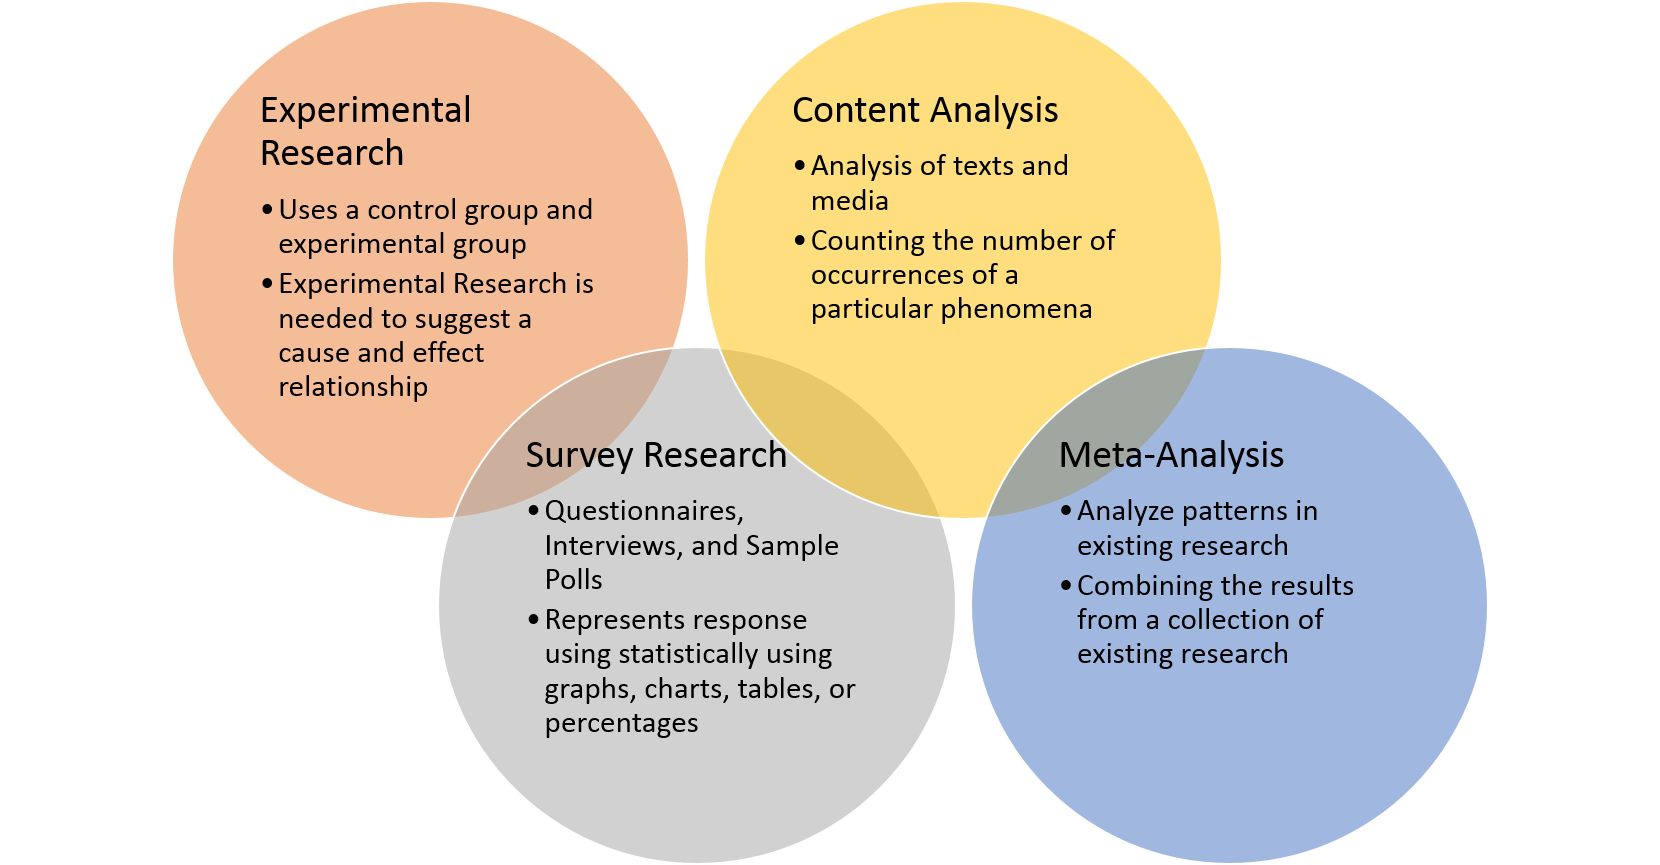 Illustration of four circles, depicting different types of research, with textual labels